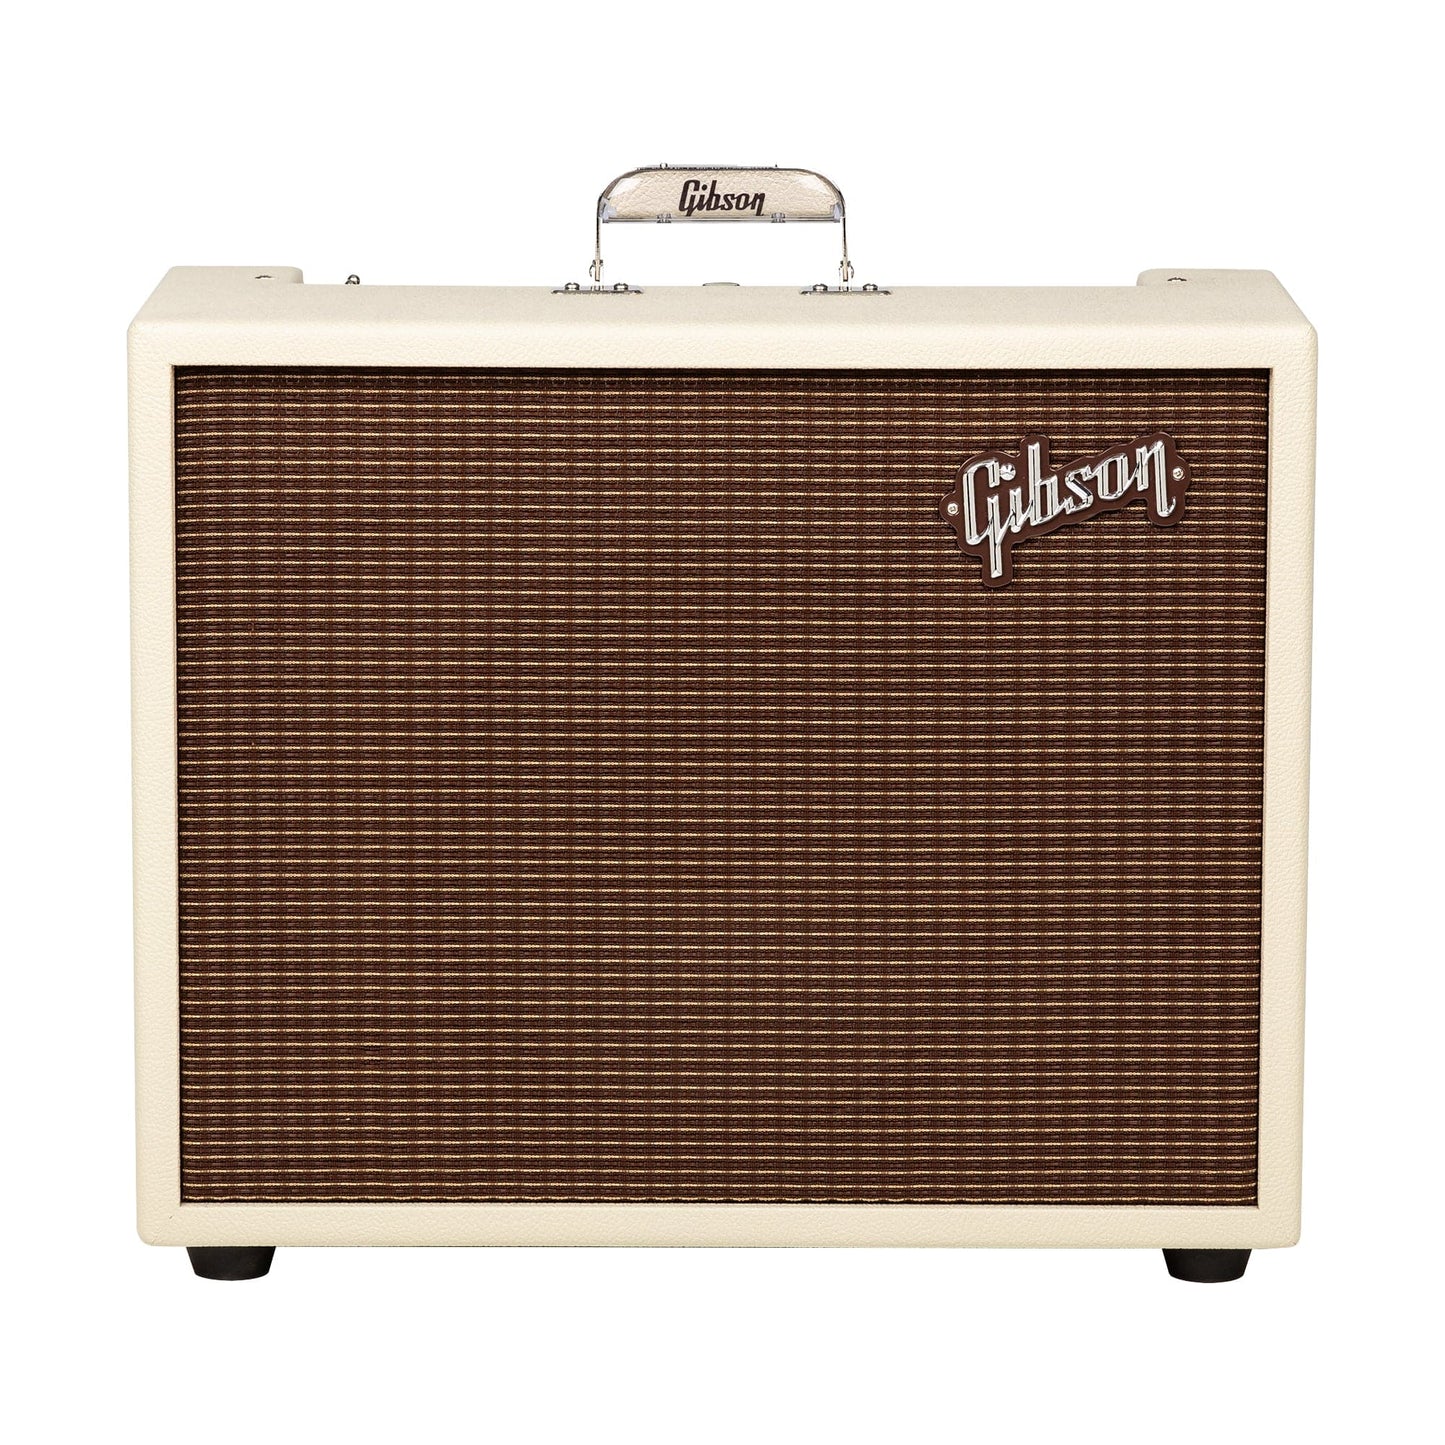 Gibson Falcon 20 20w 1x12 Combo Amp Amps / Guitar Combos